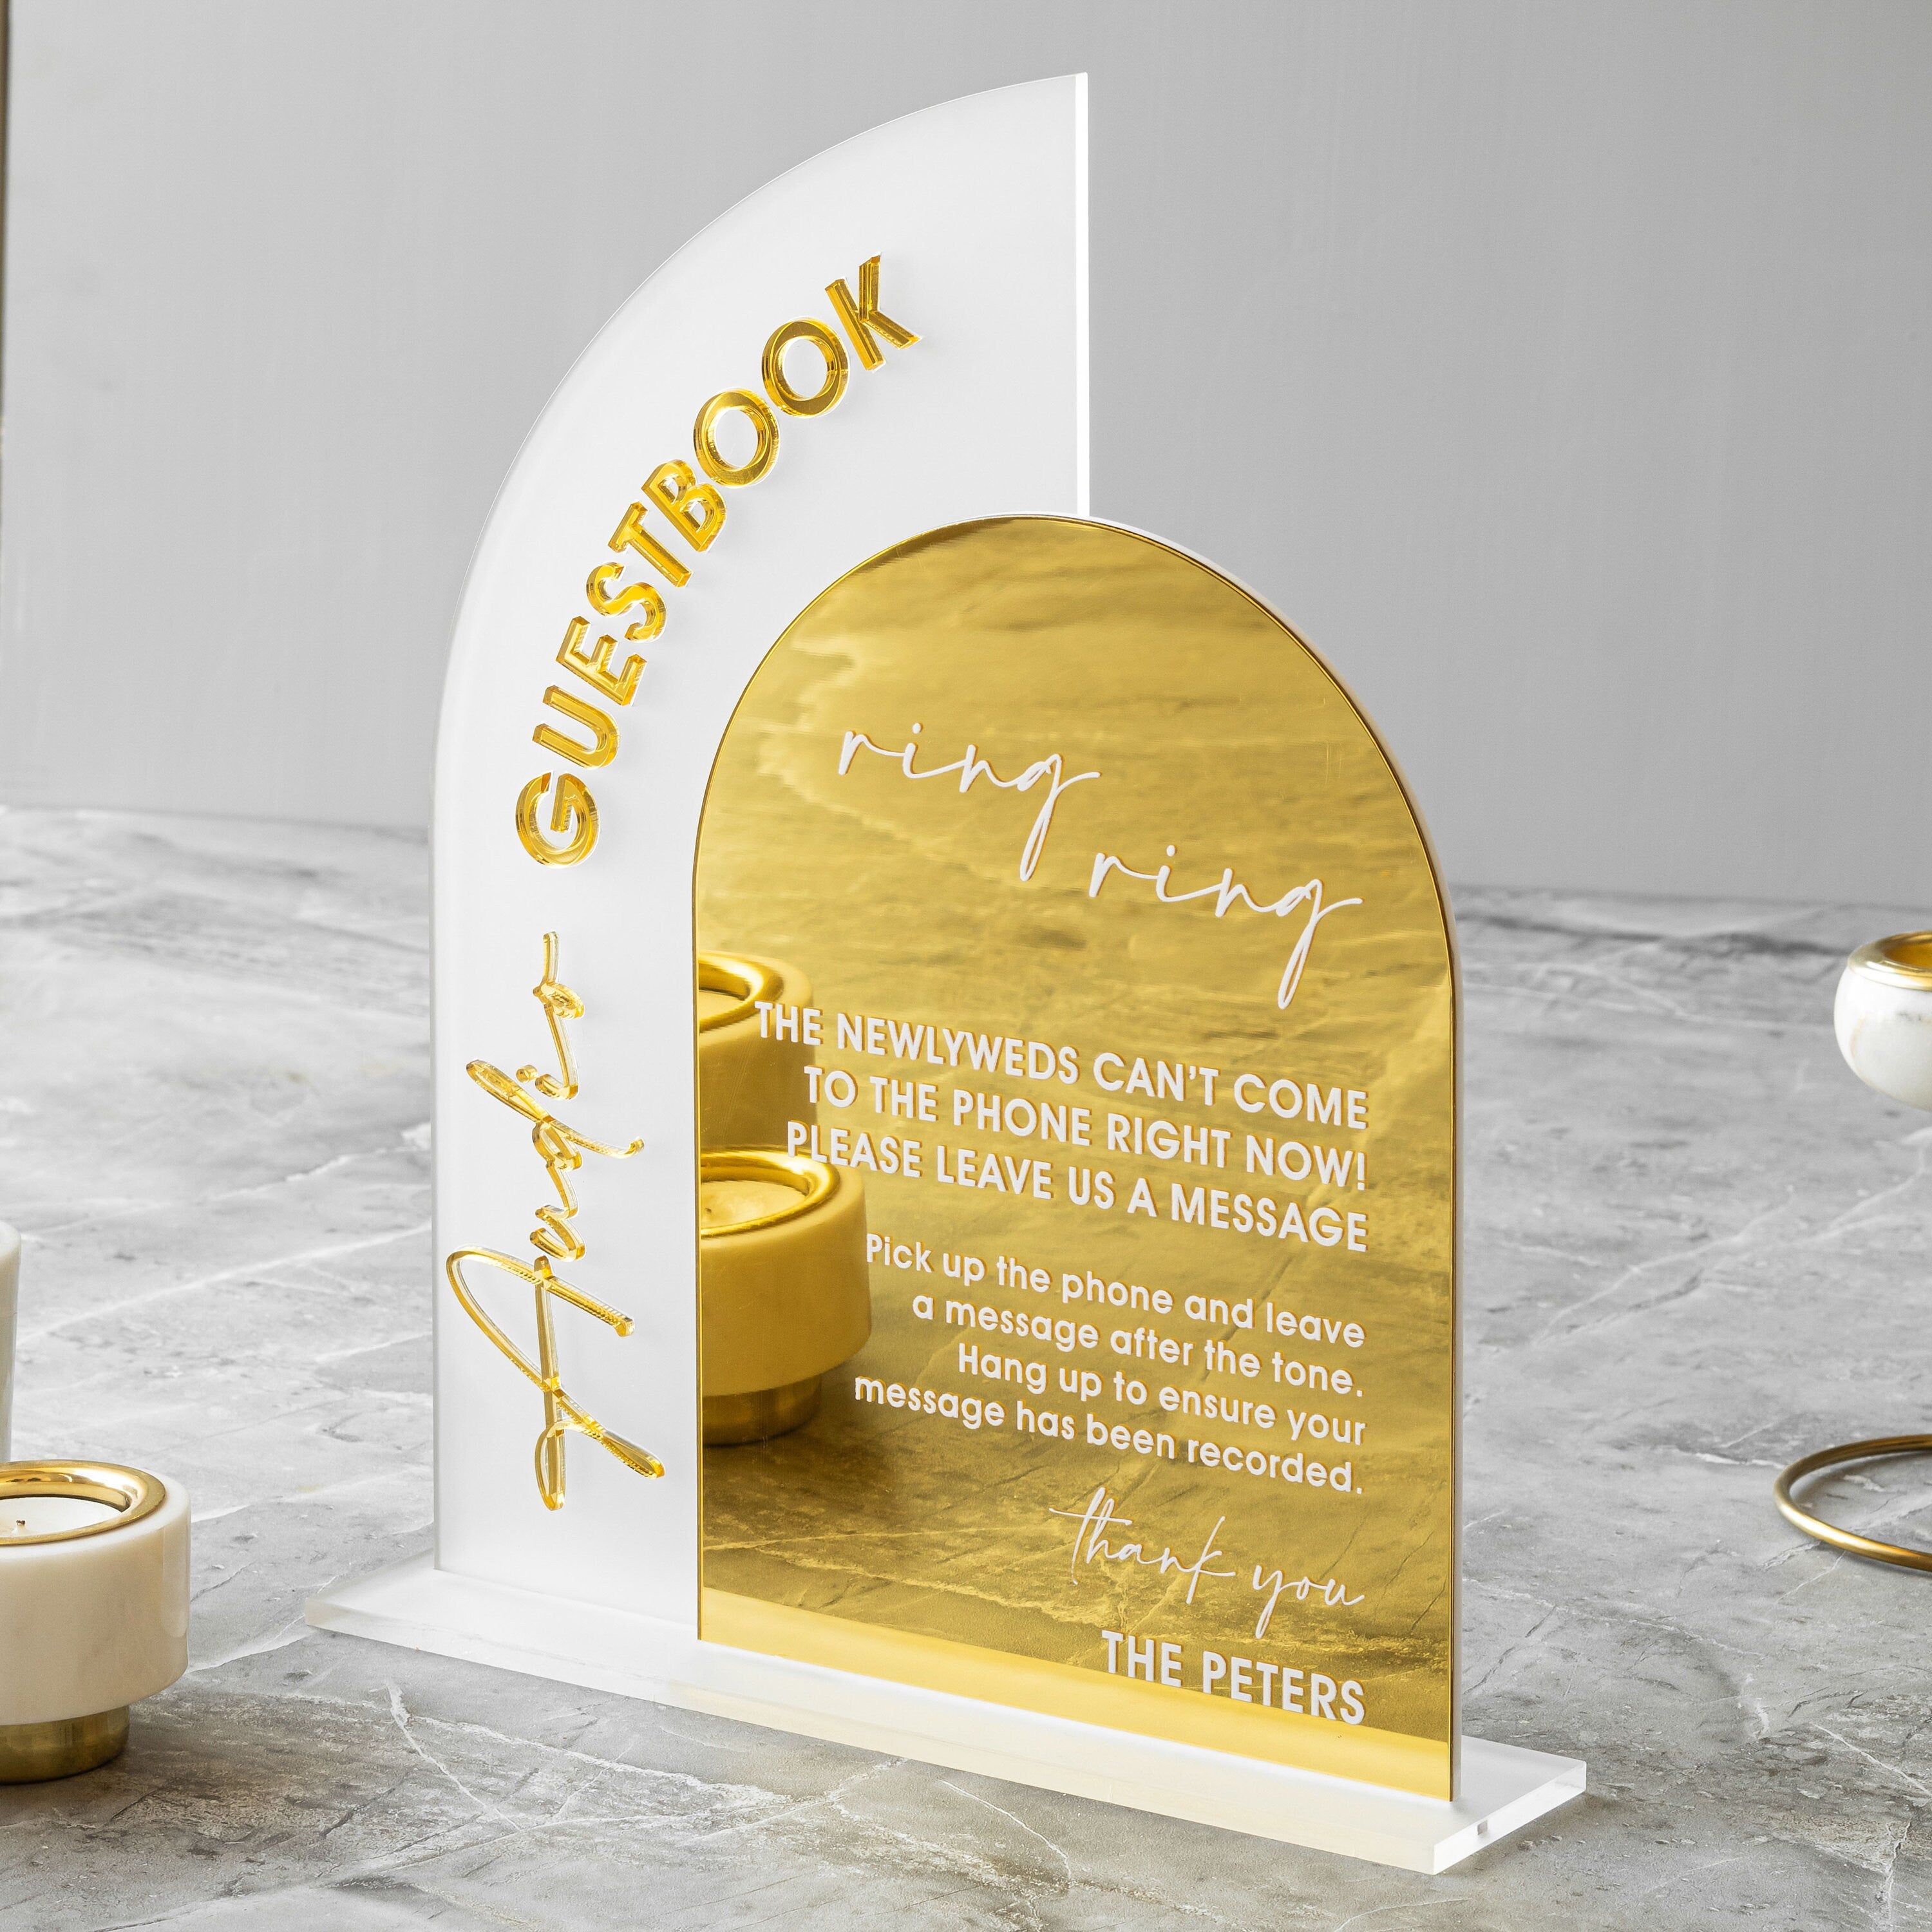 Audio Guestbook Sign, Wedding Guestbook Sign, Telephone Guest Book Sign, Wedding Reception Decor, Wedding Signage, Gold Mirror Wedding Signs